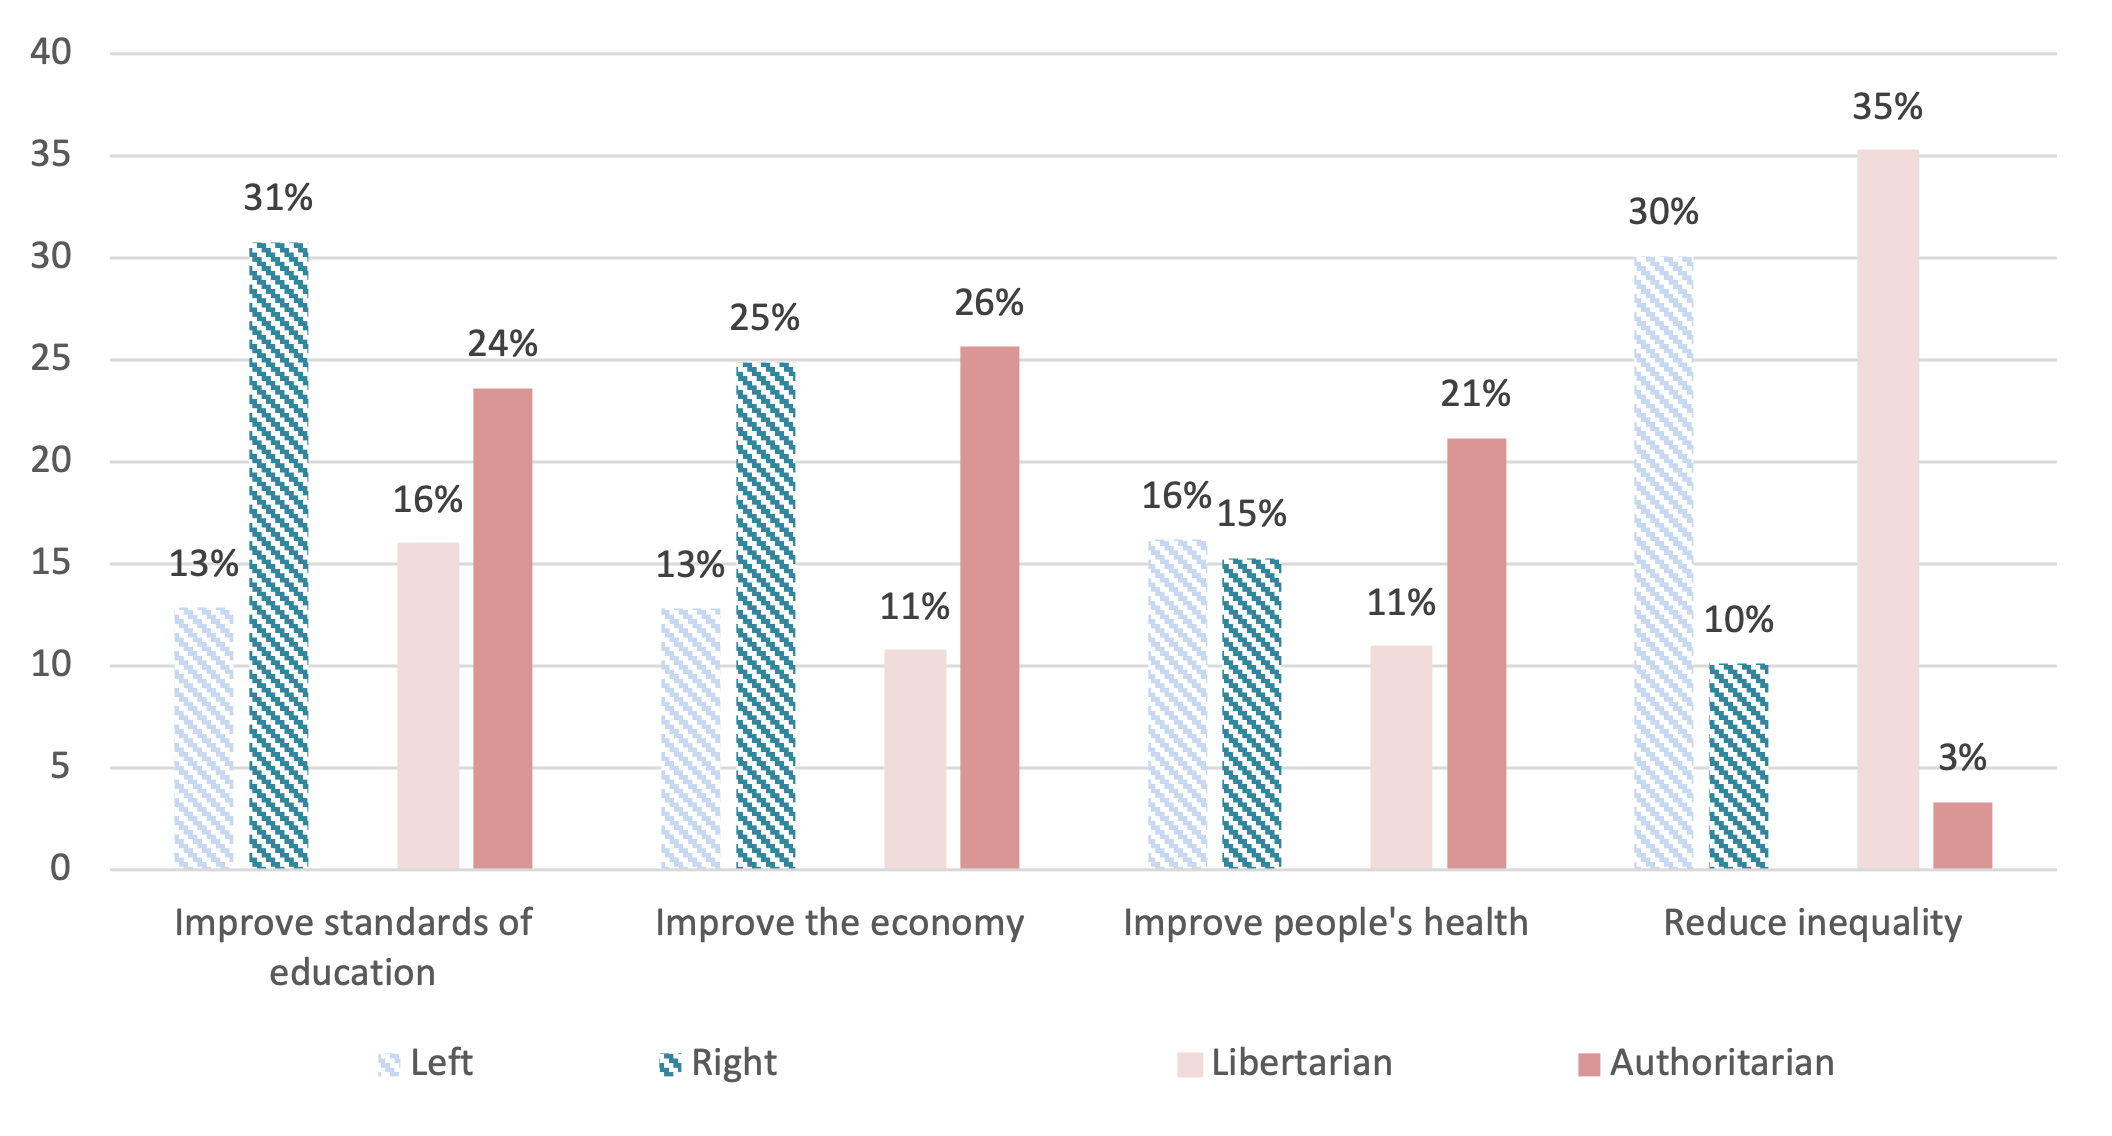 Column chart visualising respondents views on their priorities for the Scottish Government split by social and political values. The chart demonstrates a relationship between these two factors, with those on the right and the more authoritarian favouring a focus on improving the economy and education and those who are more liberal and on the left favouring a reduction in inequality.